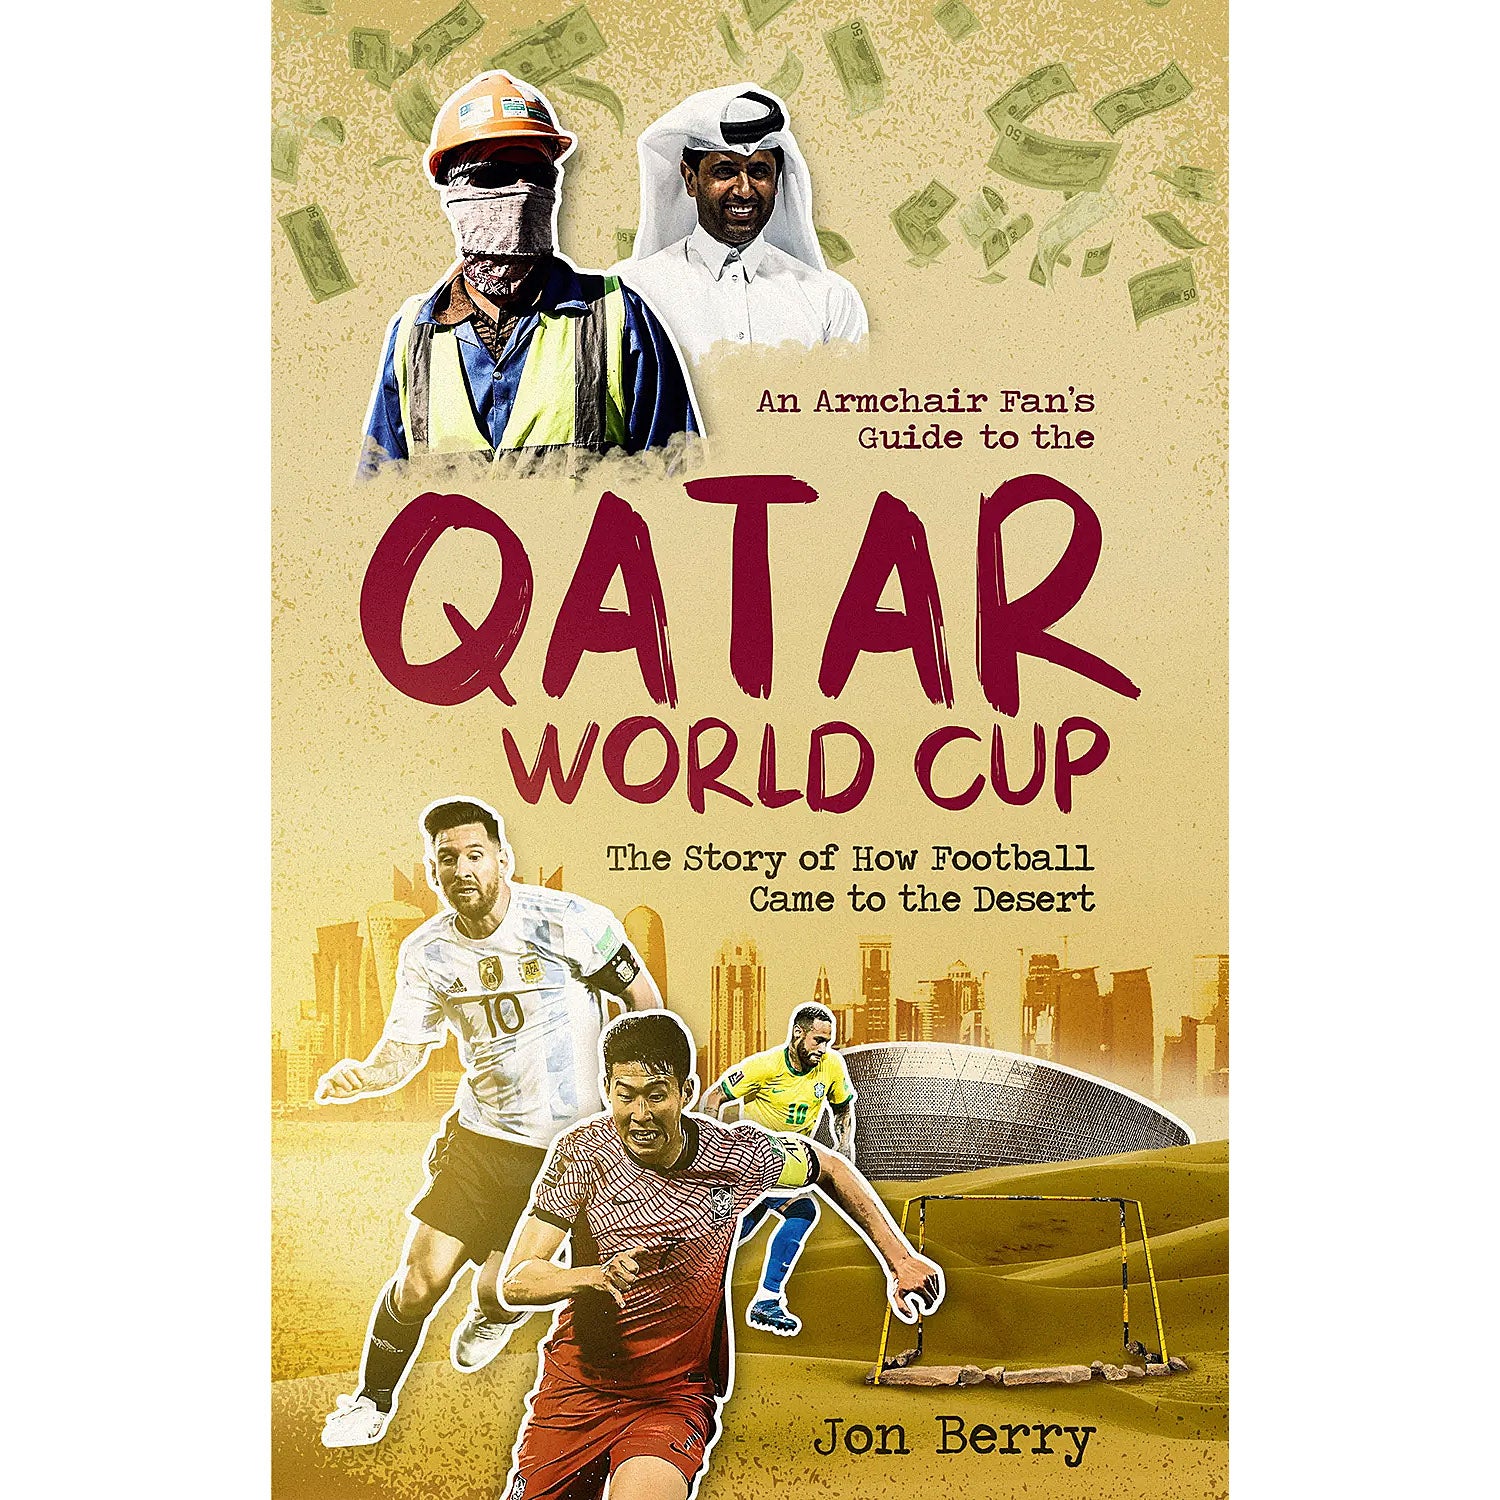 An Armchair Fan's Guide to the Qatar World Cup – The Story of How Football Came to the Desert